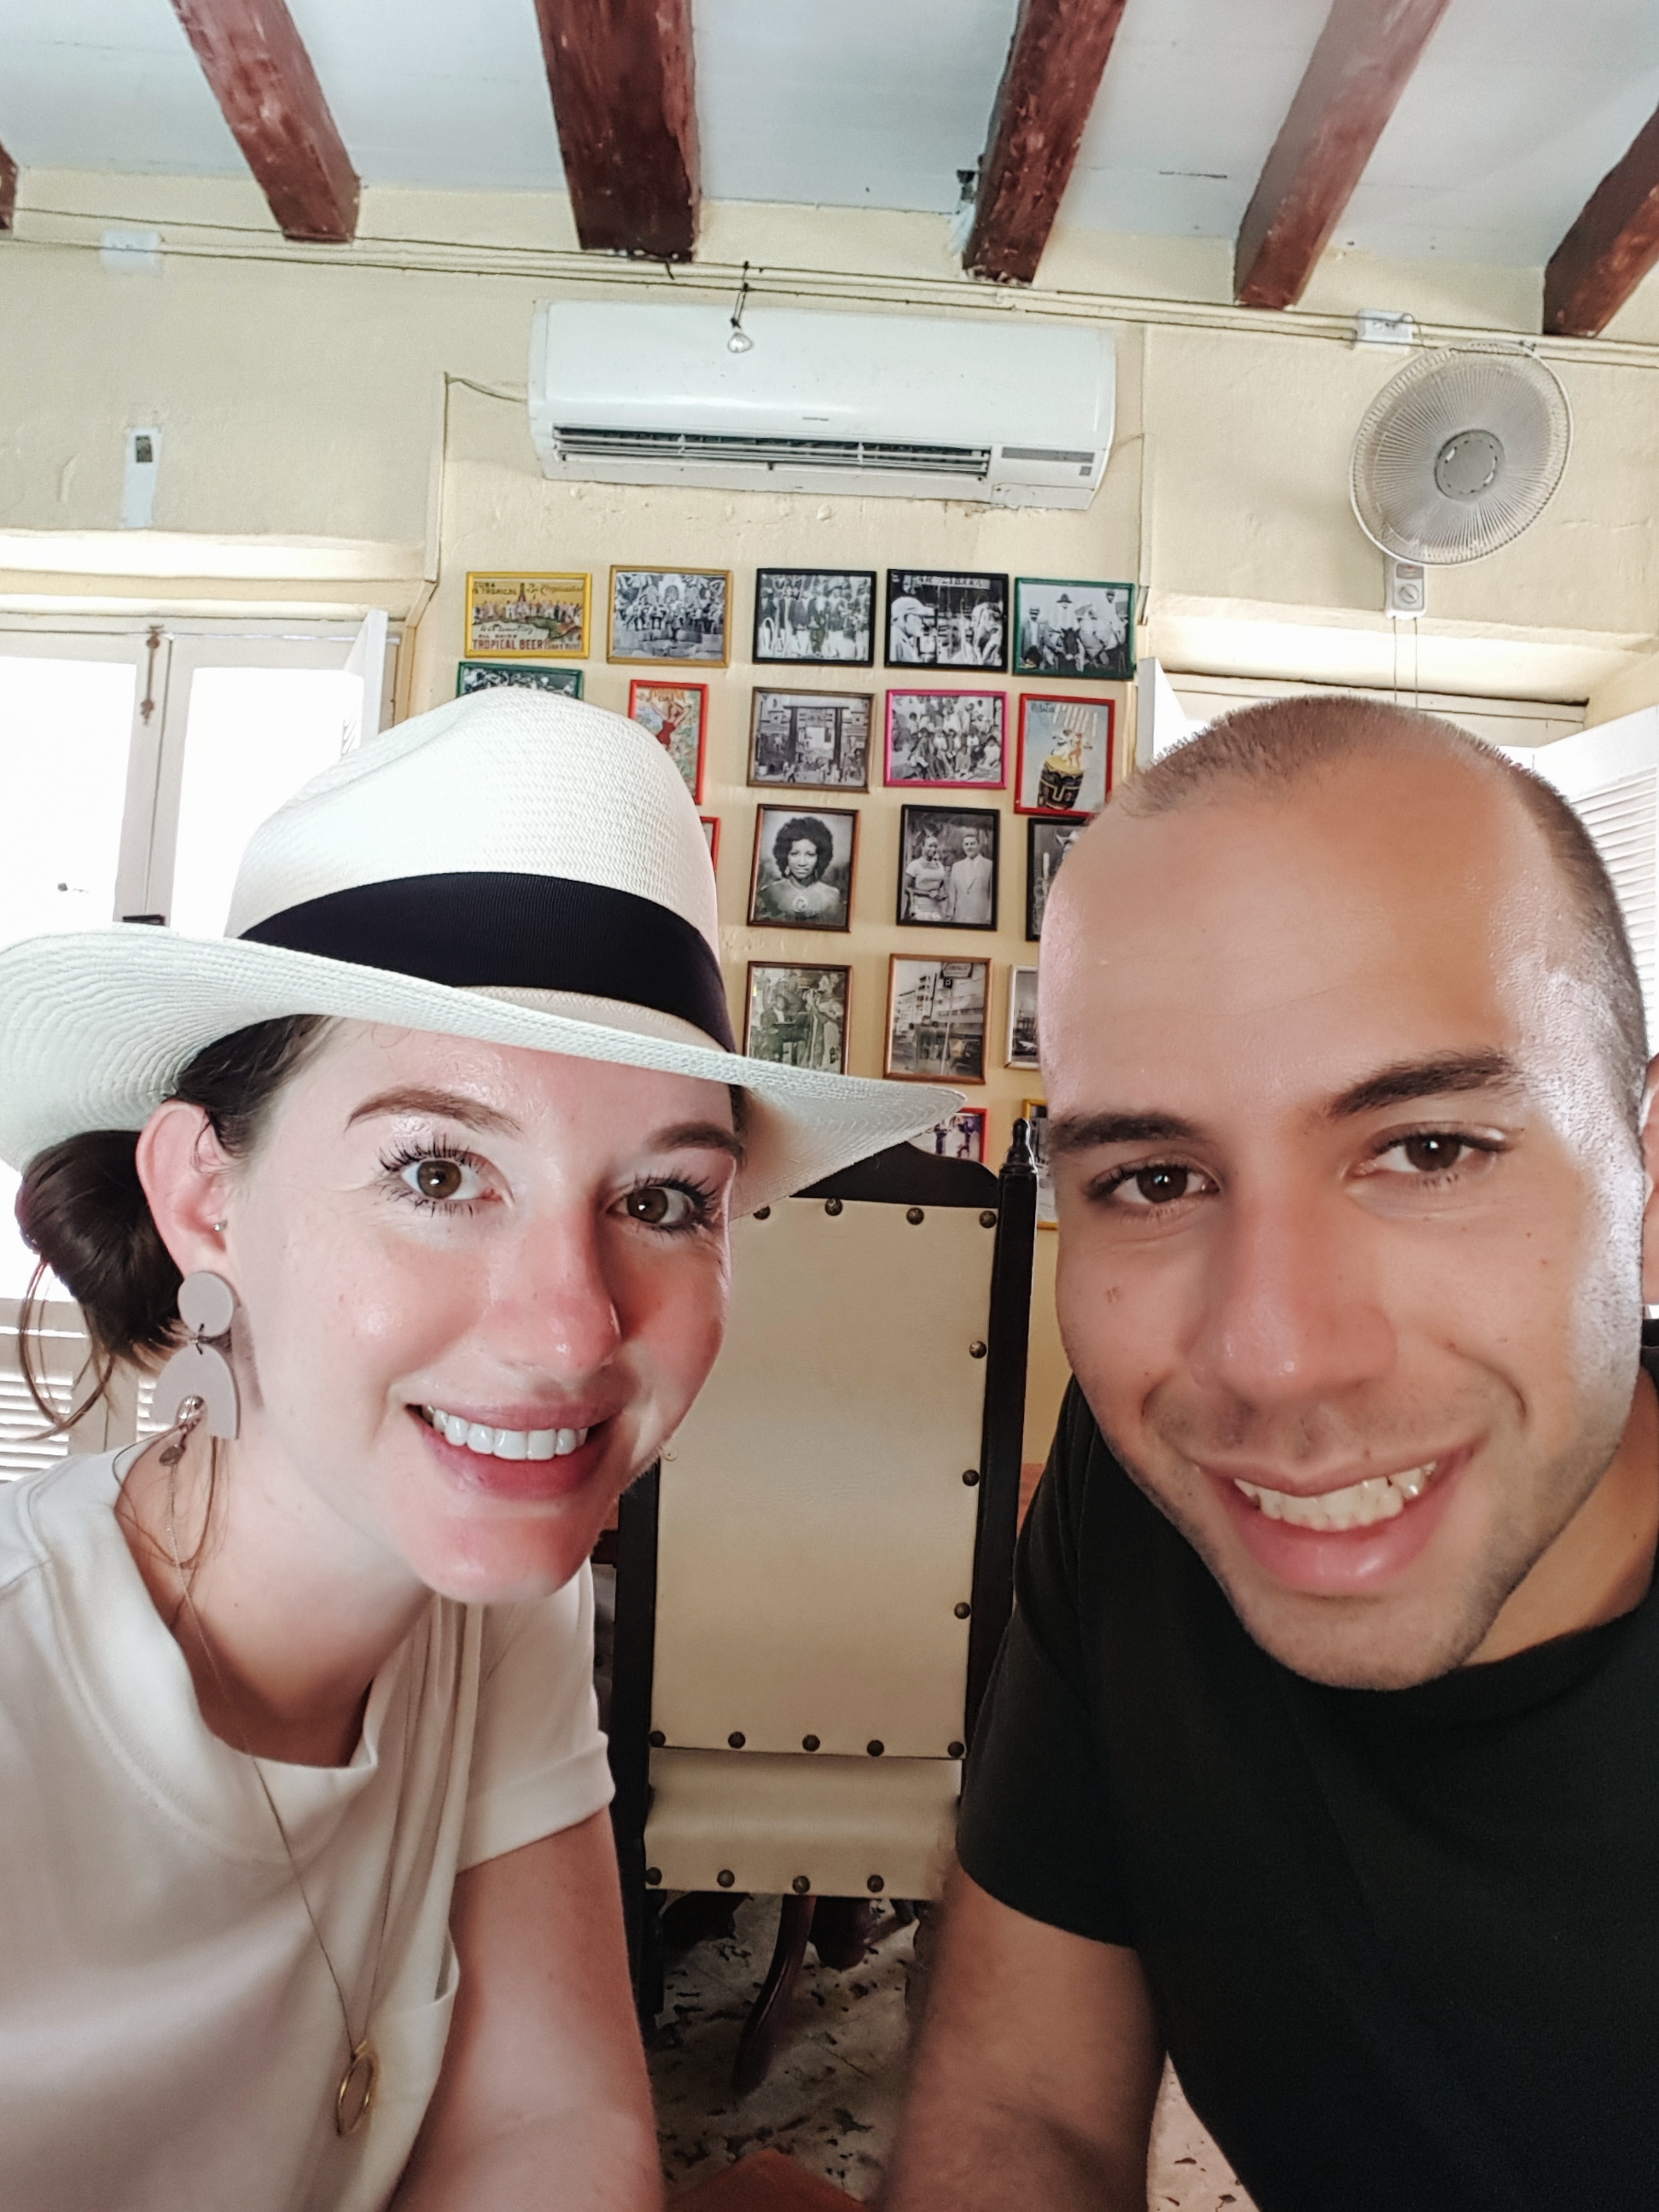 A selfie of Krystal and Michael in a bar in Cartagena, Colombia. Krystal is wearing a Panama hat and white tee, and Michael is wearing a black tee. They are both sweaty but smiling.